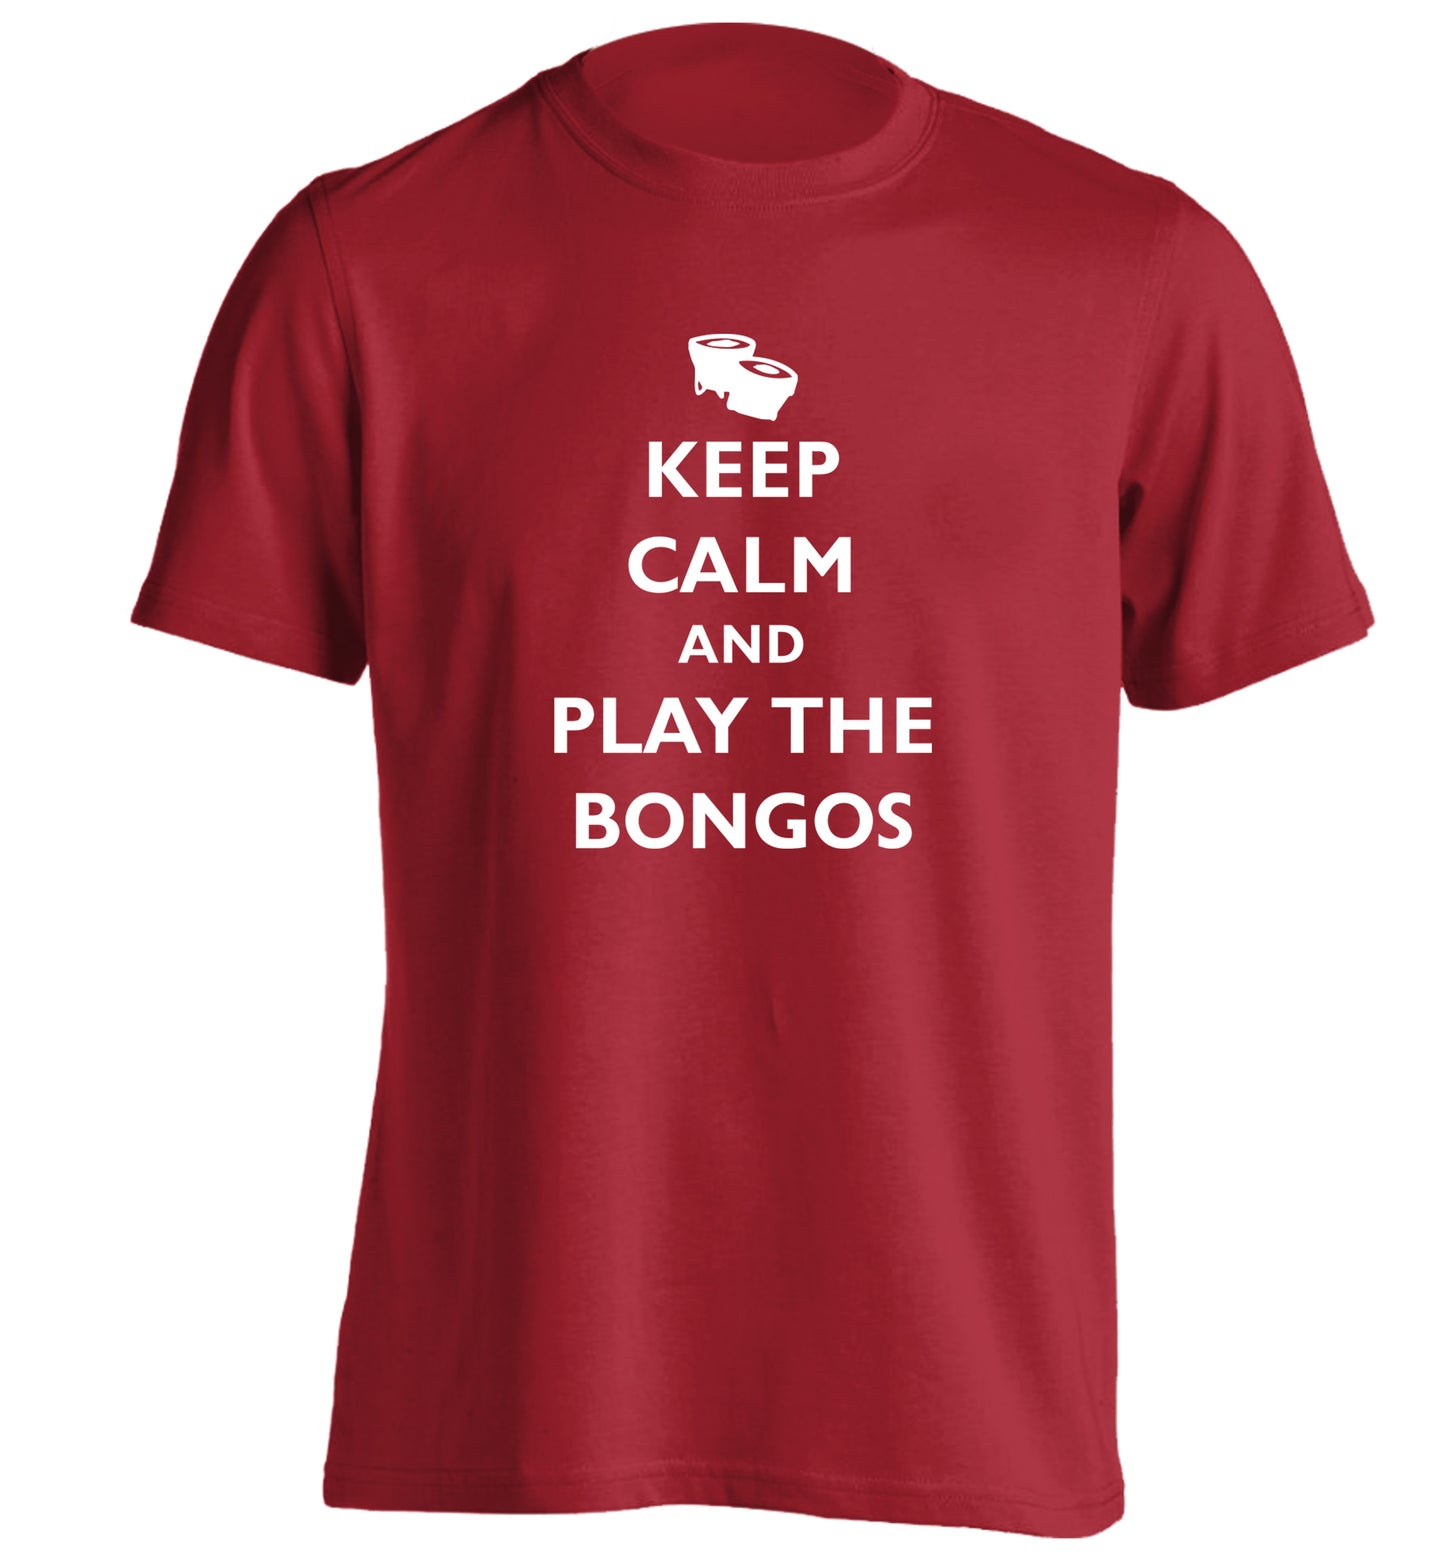 Keep calm and play the bongos adults unisex red Tshirt 2XL